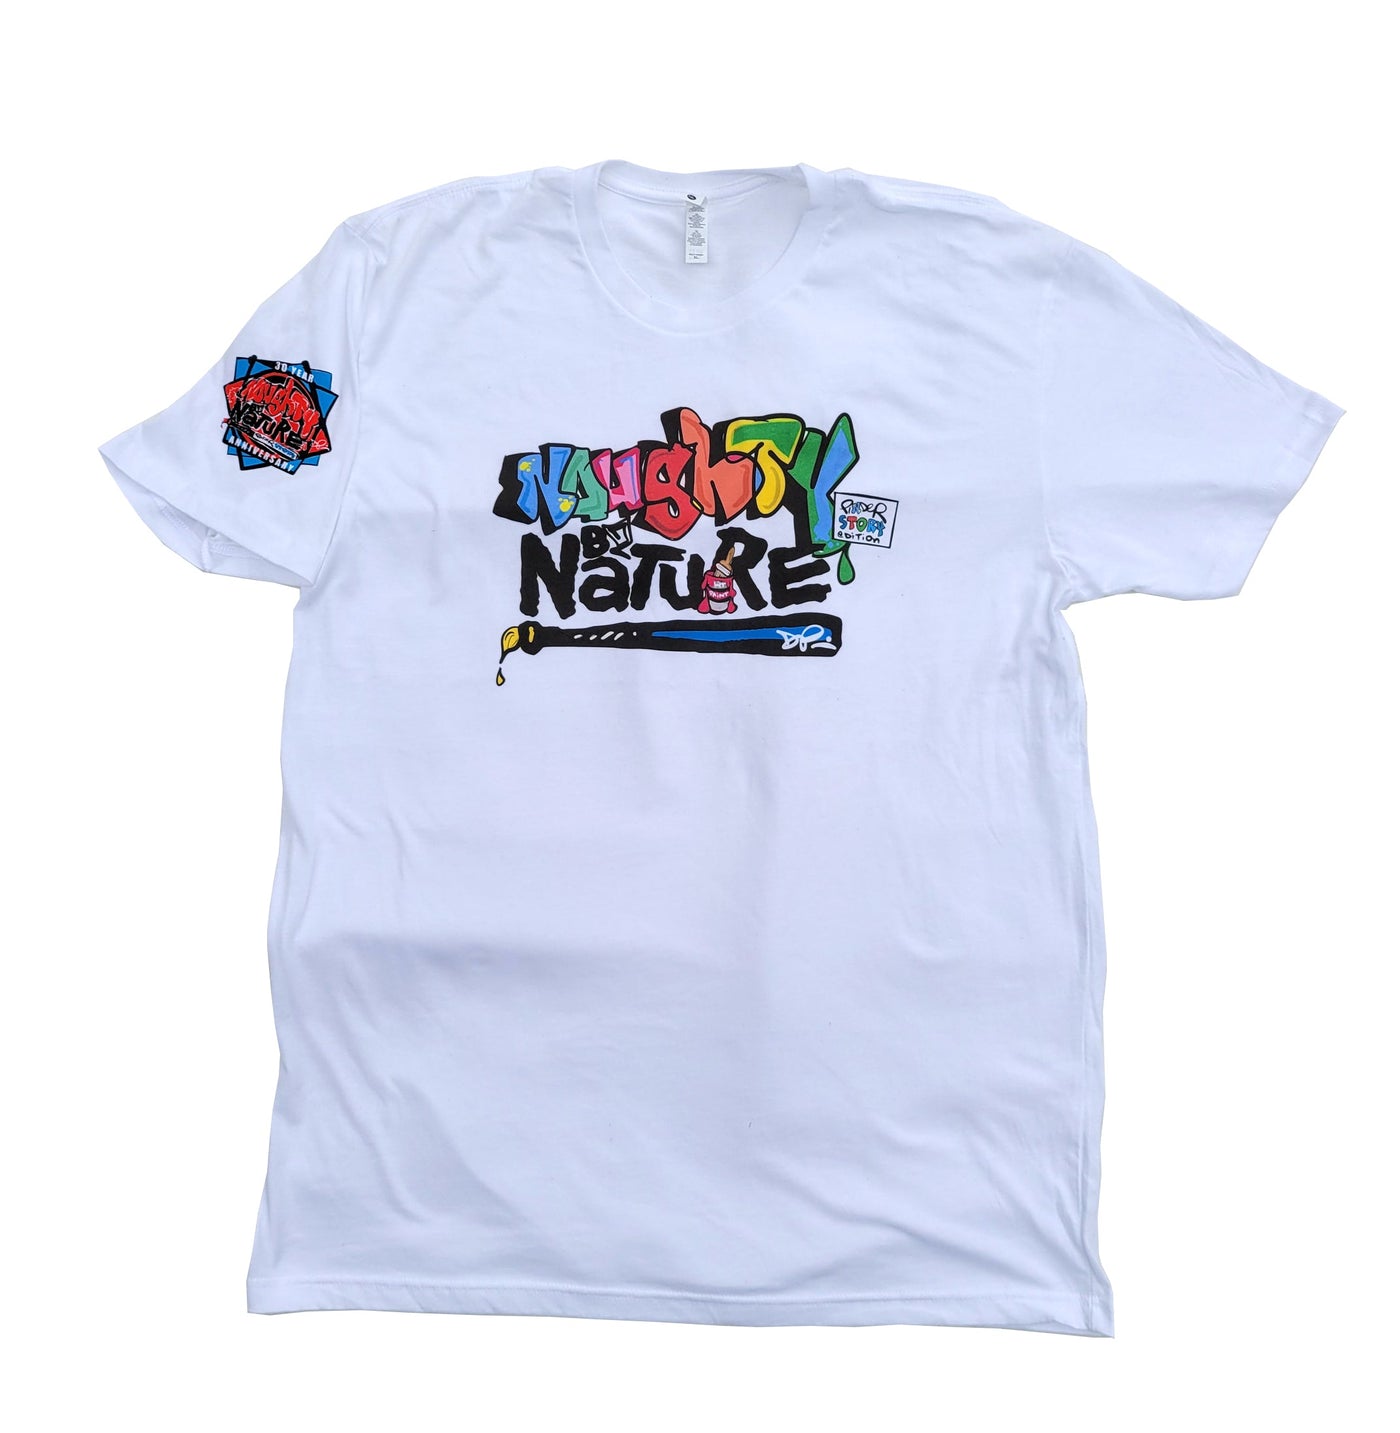 Naughty By Nature x Pinder Story Edition Tee